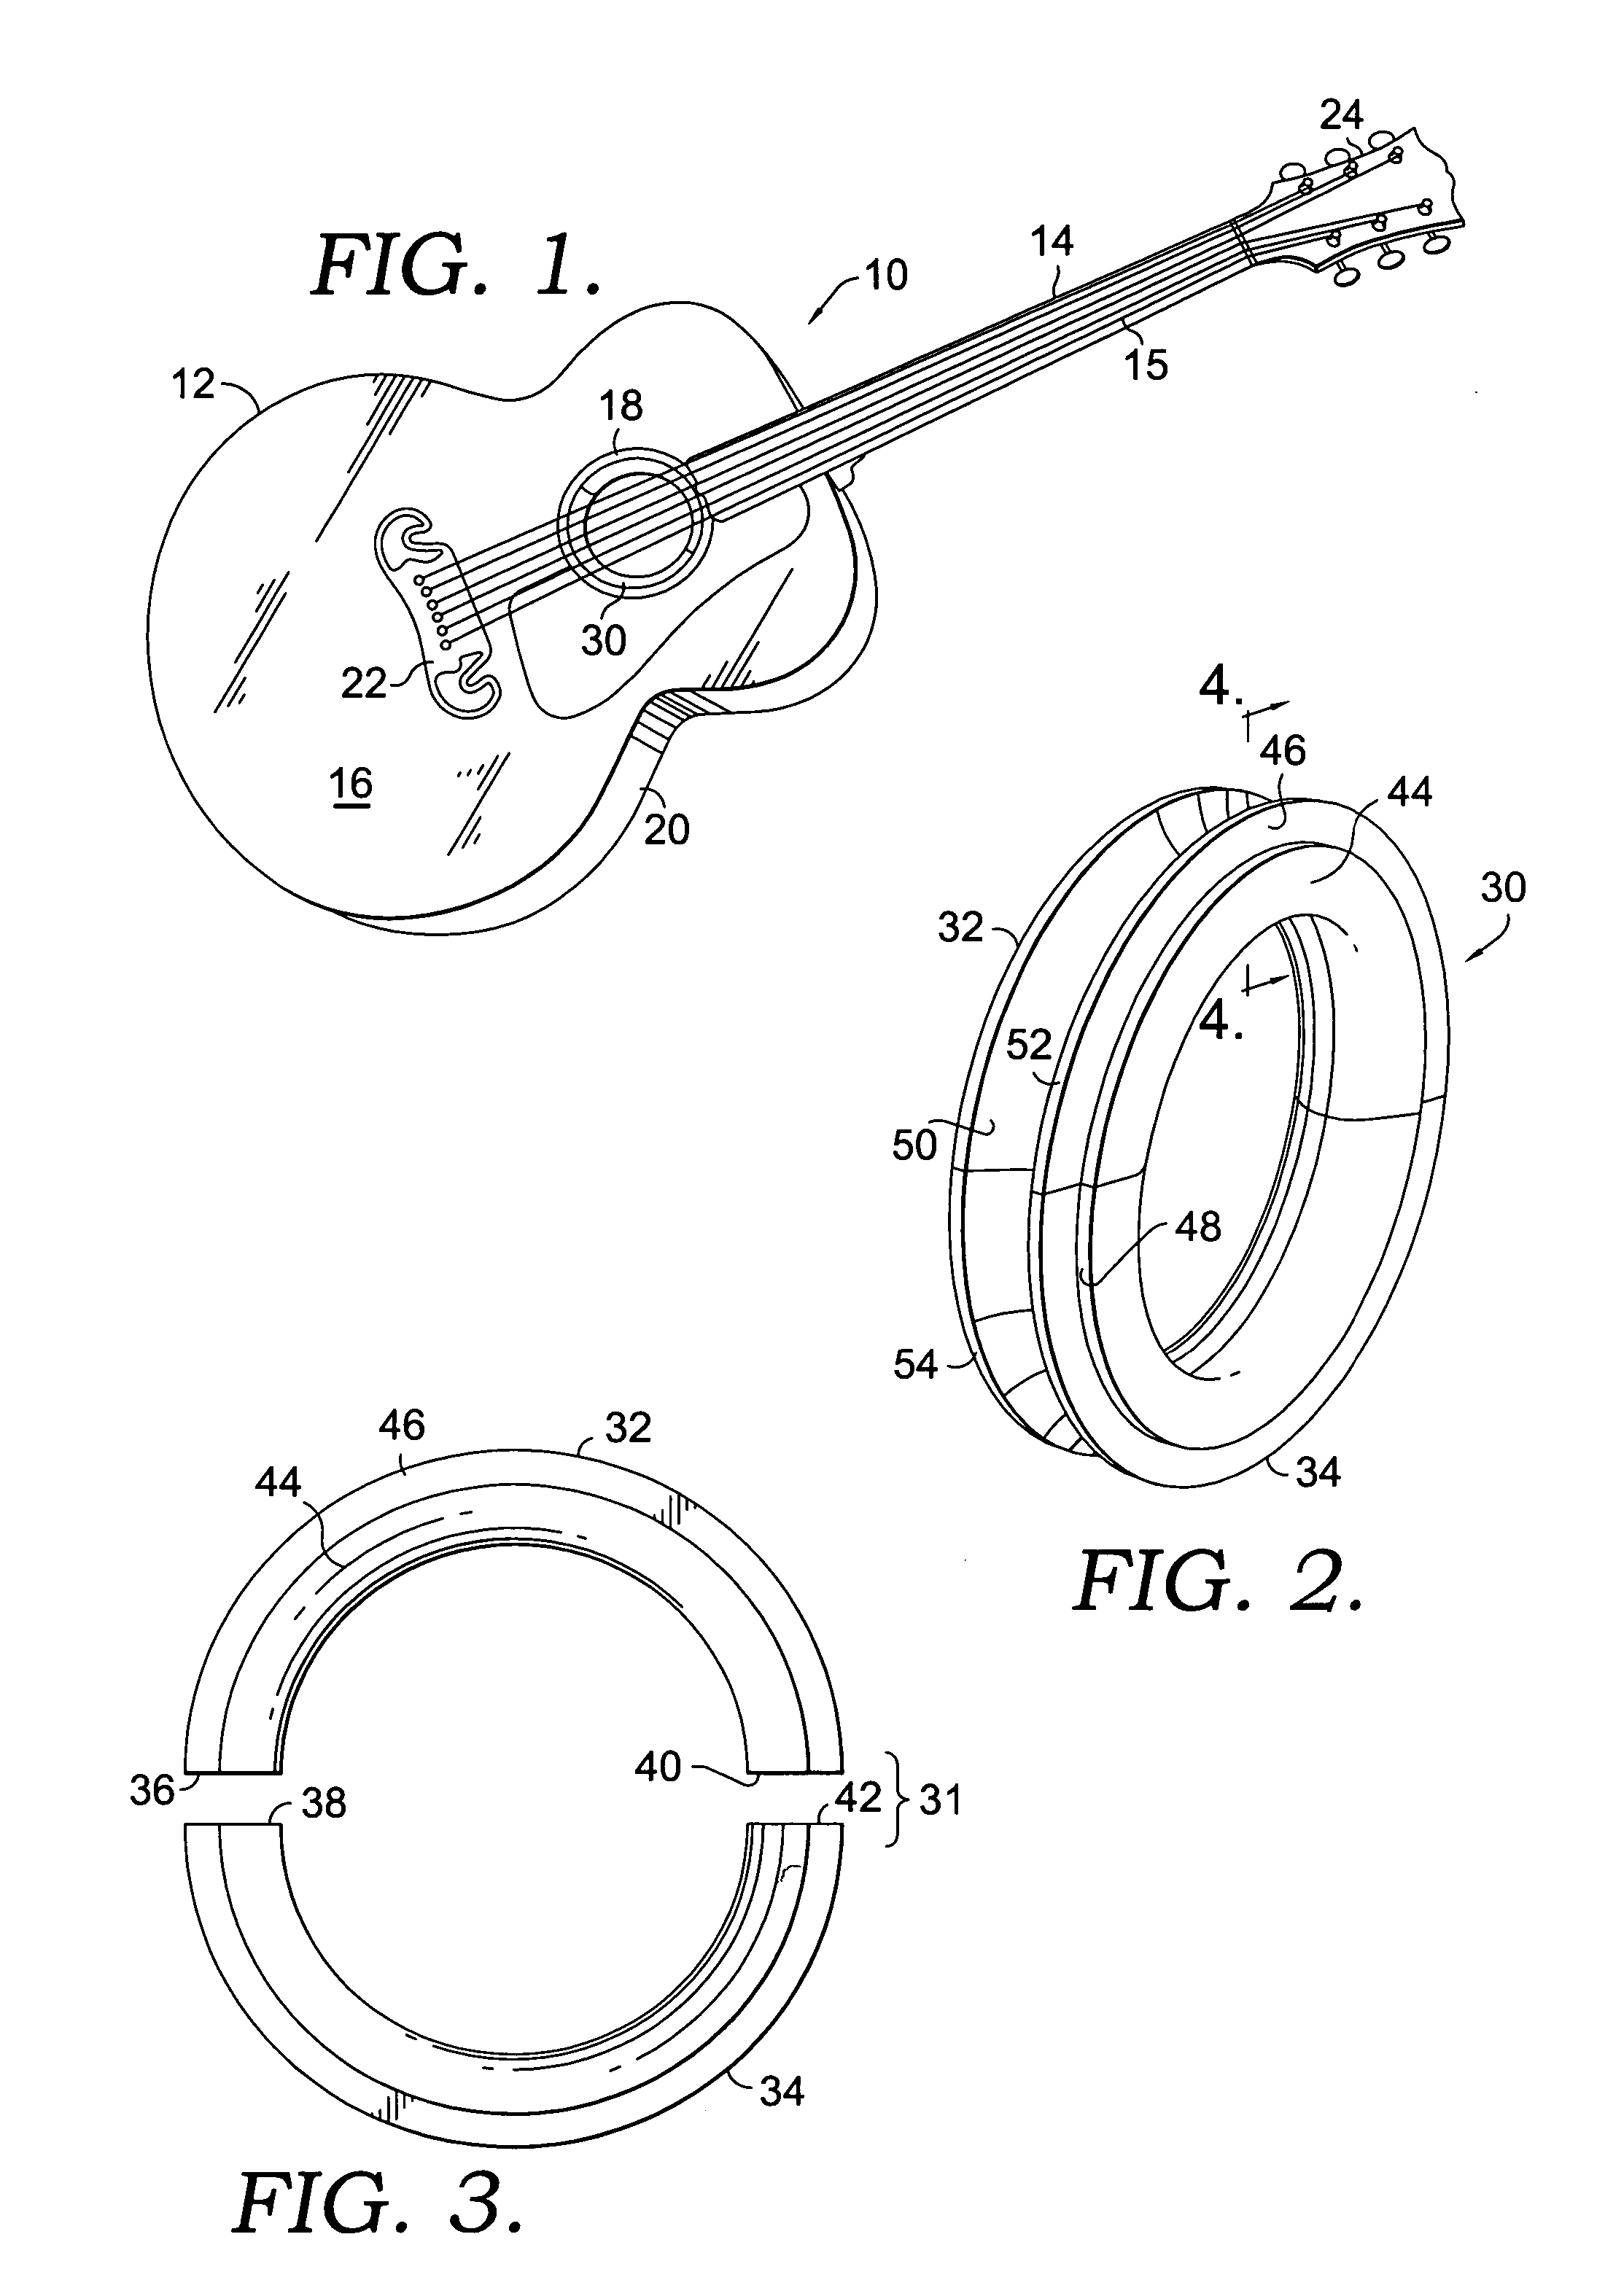 Soundhole insert for a stringed instrument